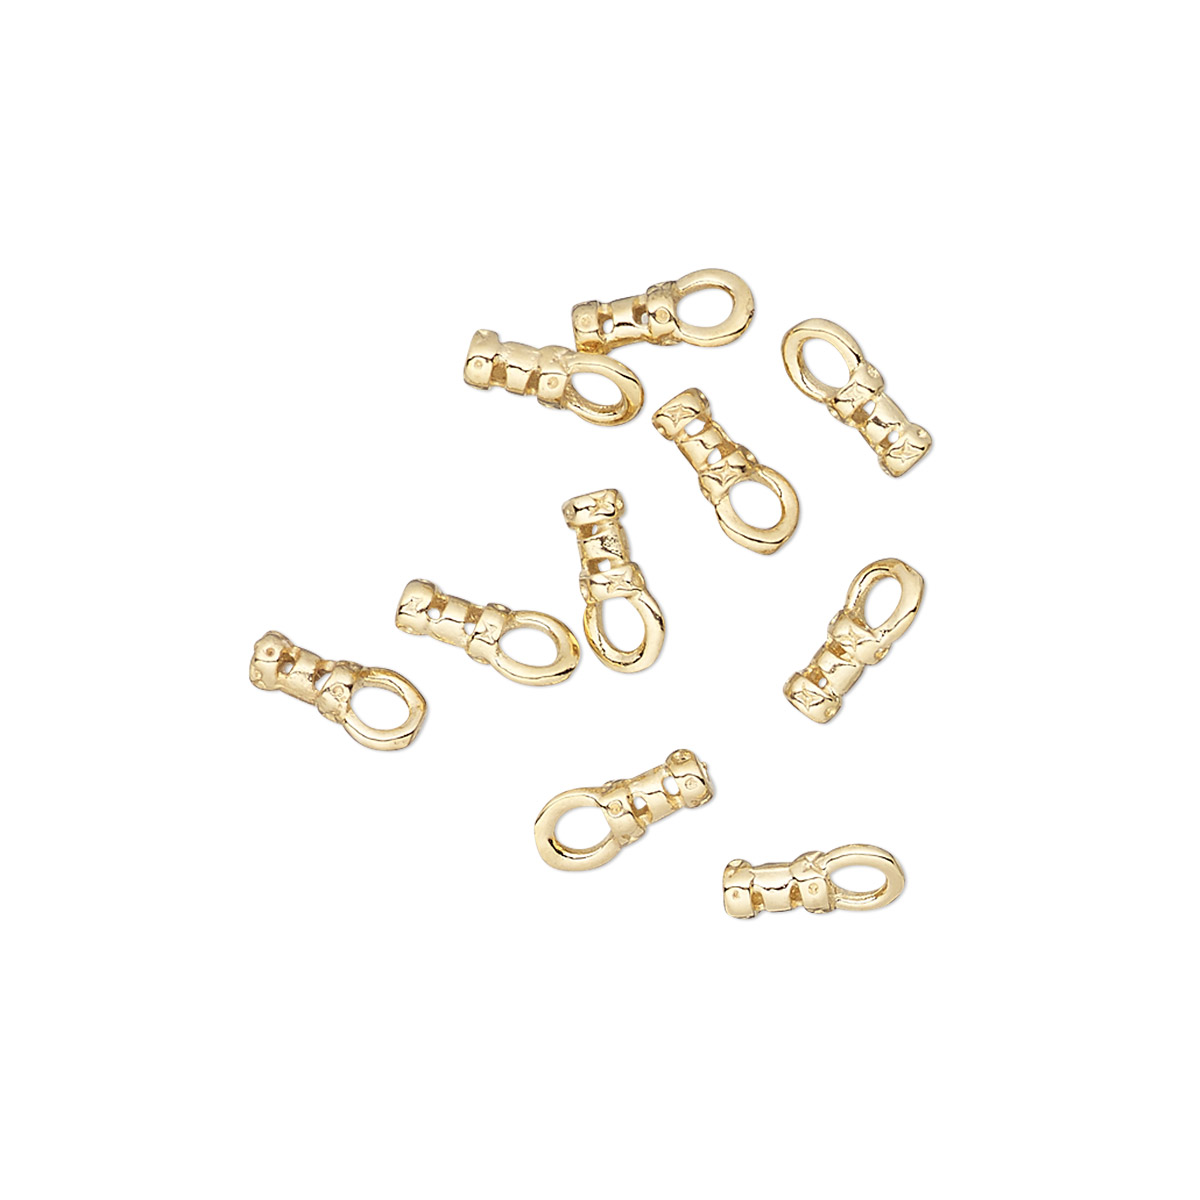 Crimp end, gold-plated brass, 4x2mm tube with loop, 1mm inside diameter ...